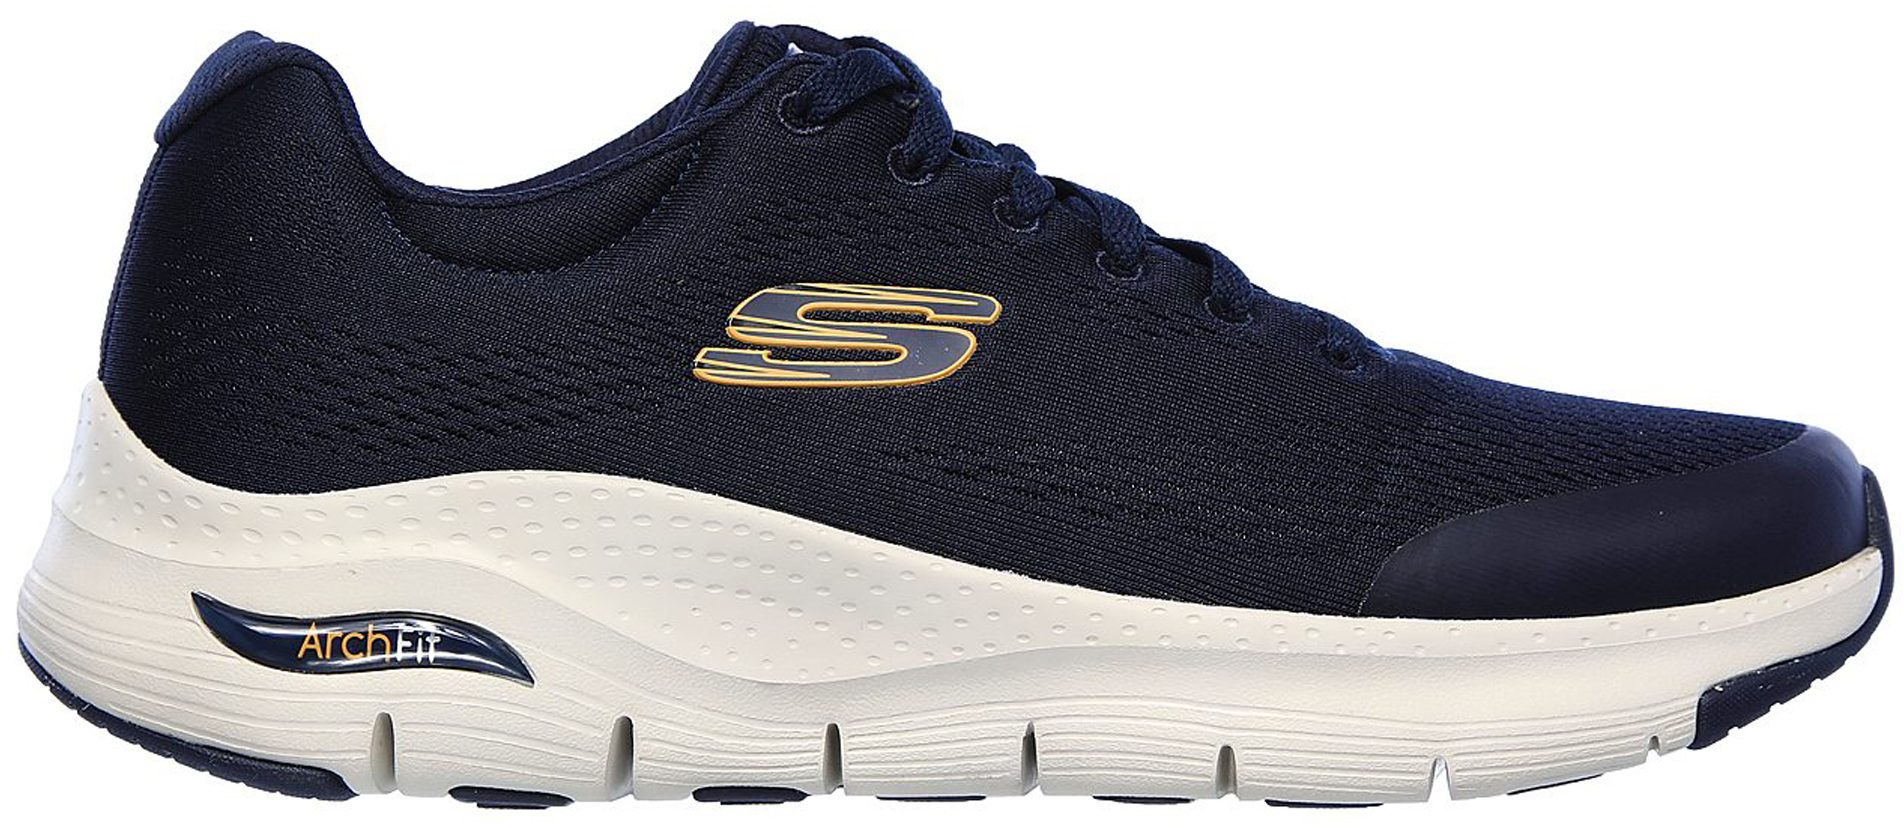 Skechers Arch Fit Navy 232040 NVY - Trainers - Humphries Shoes